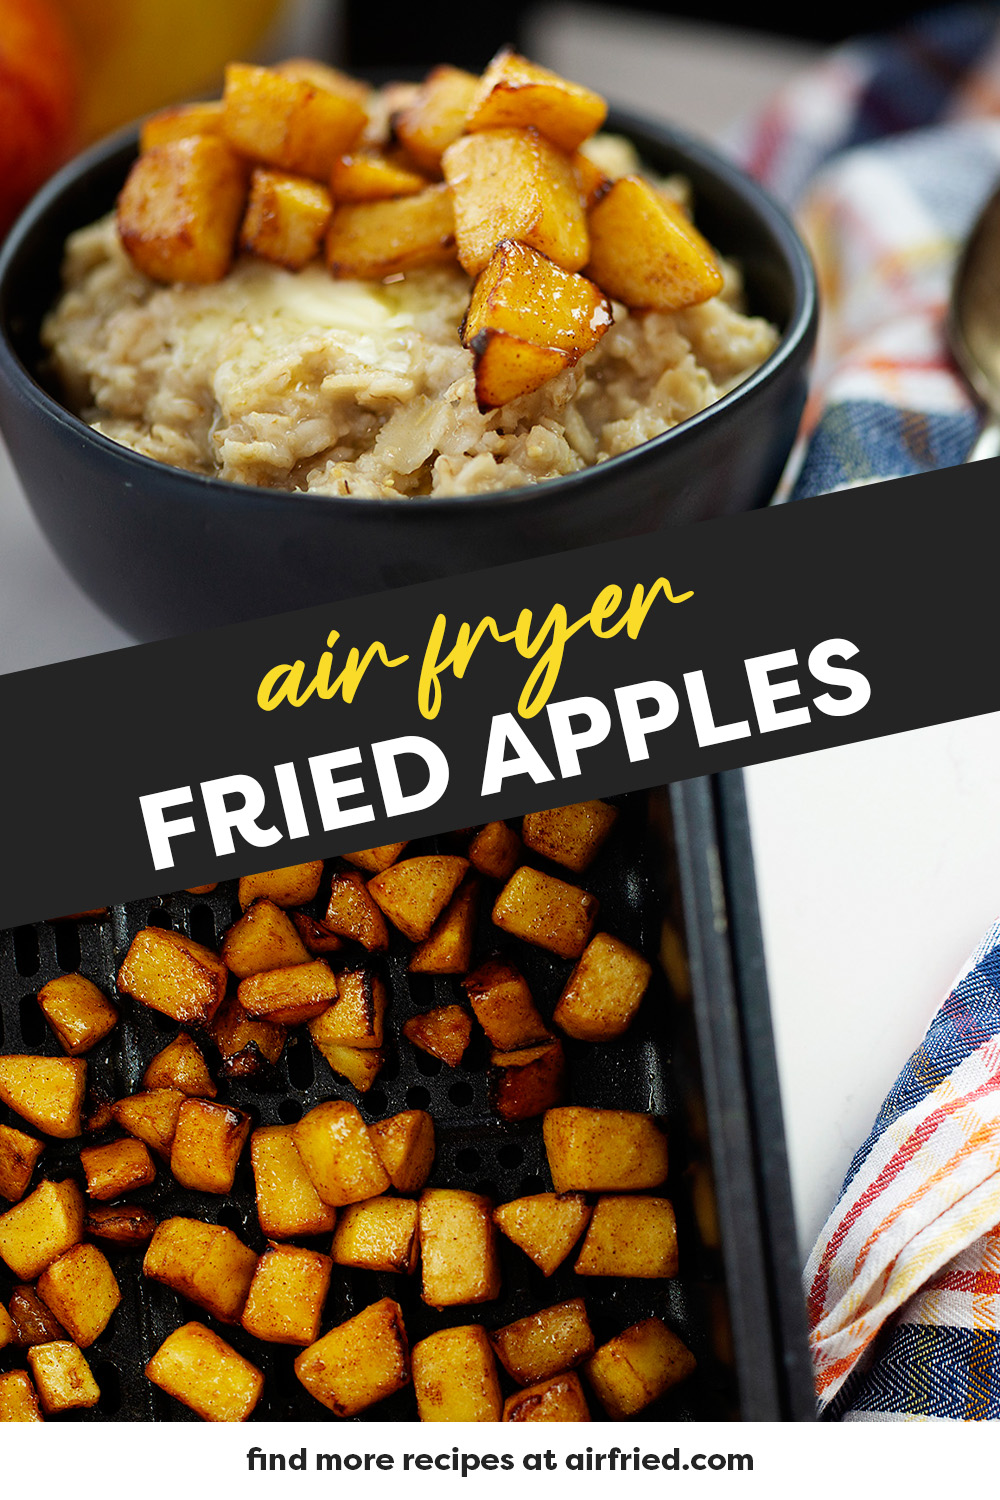 These apples are coated in a small amount of cinnamon and sugar for a little extra sweetness after cooking them in the air fryer.